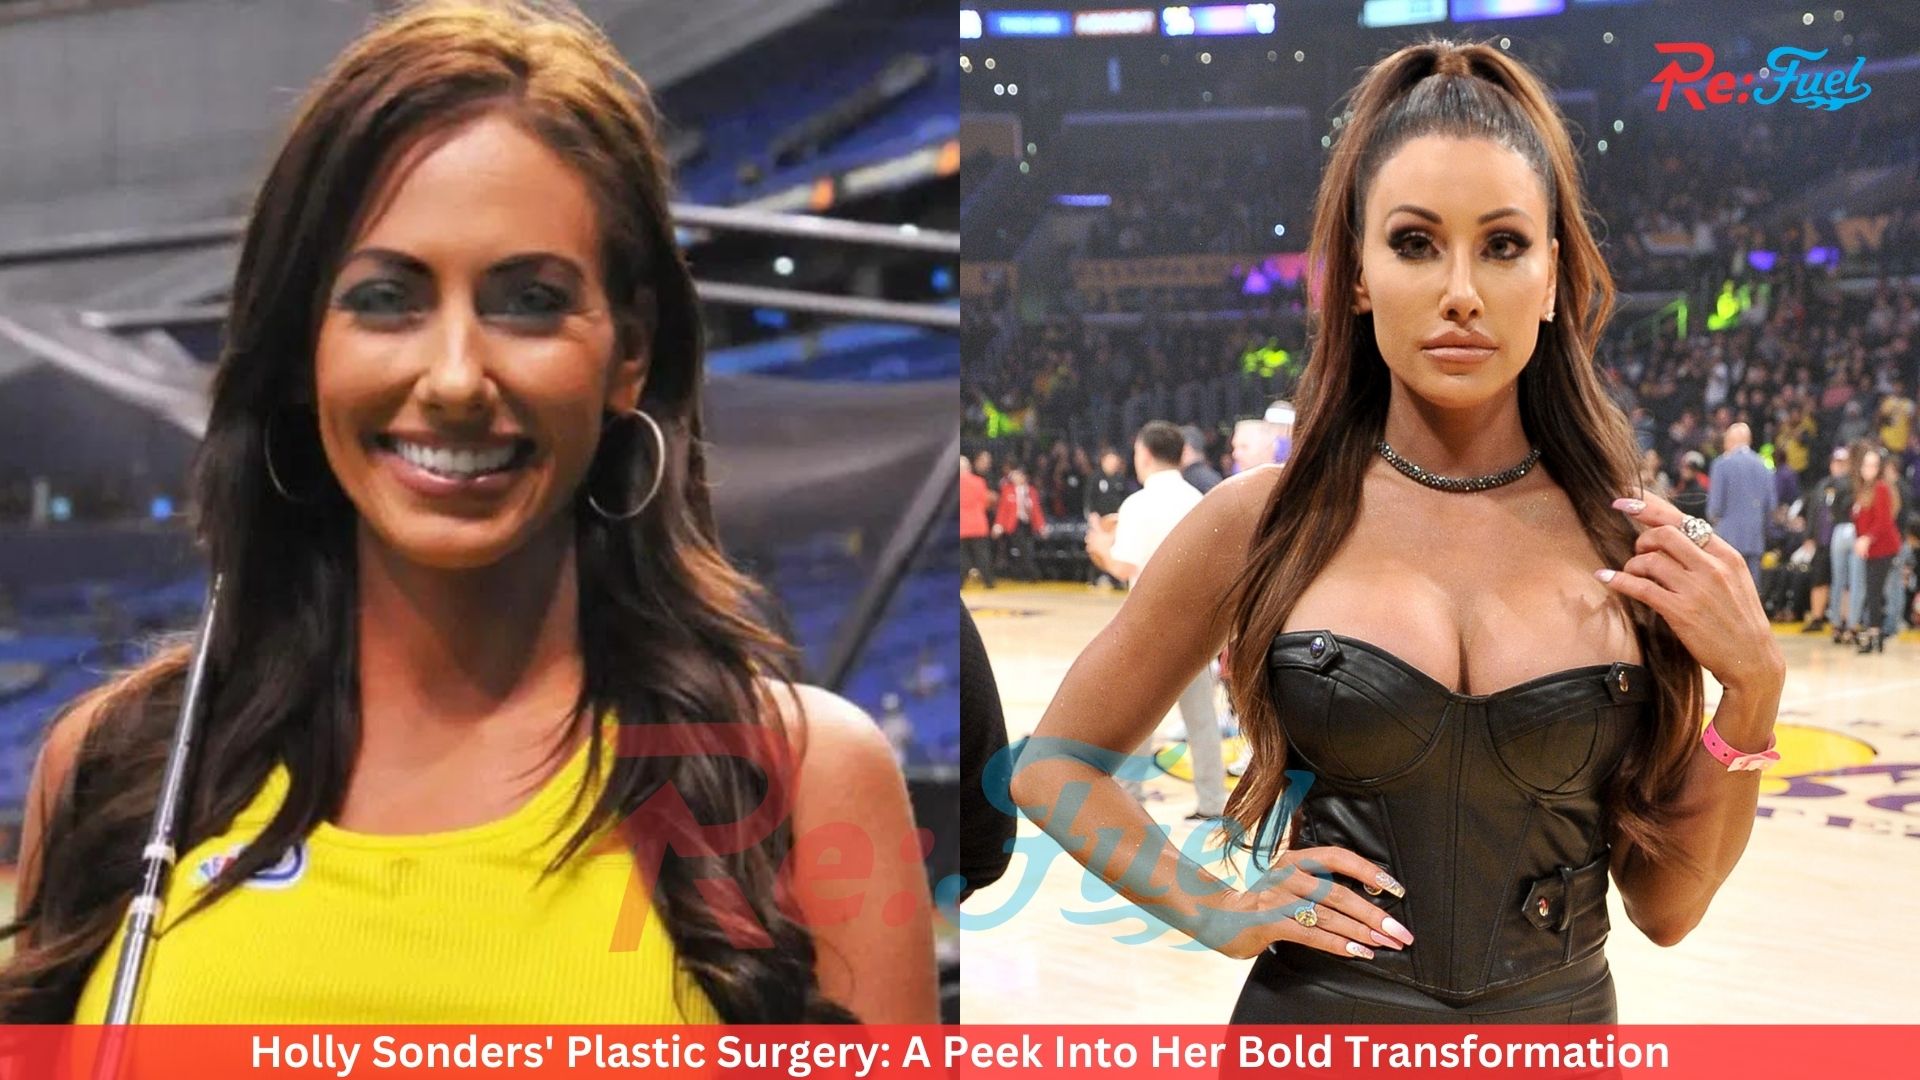 Holly Sonders' Plastic Surgery: A Peek Into Her Bold Transformation